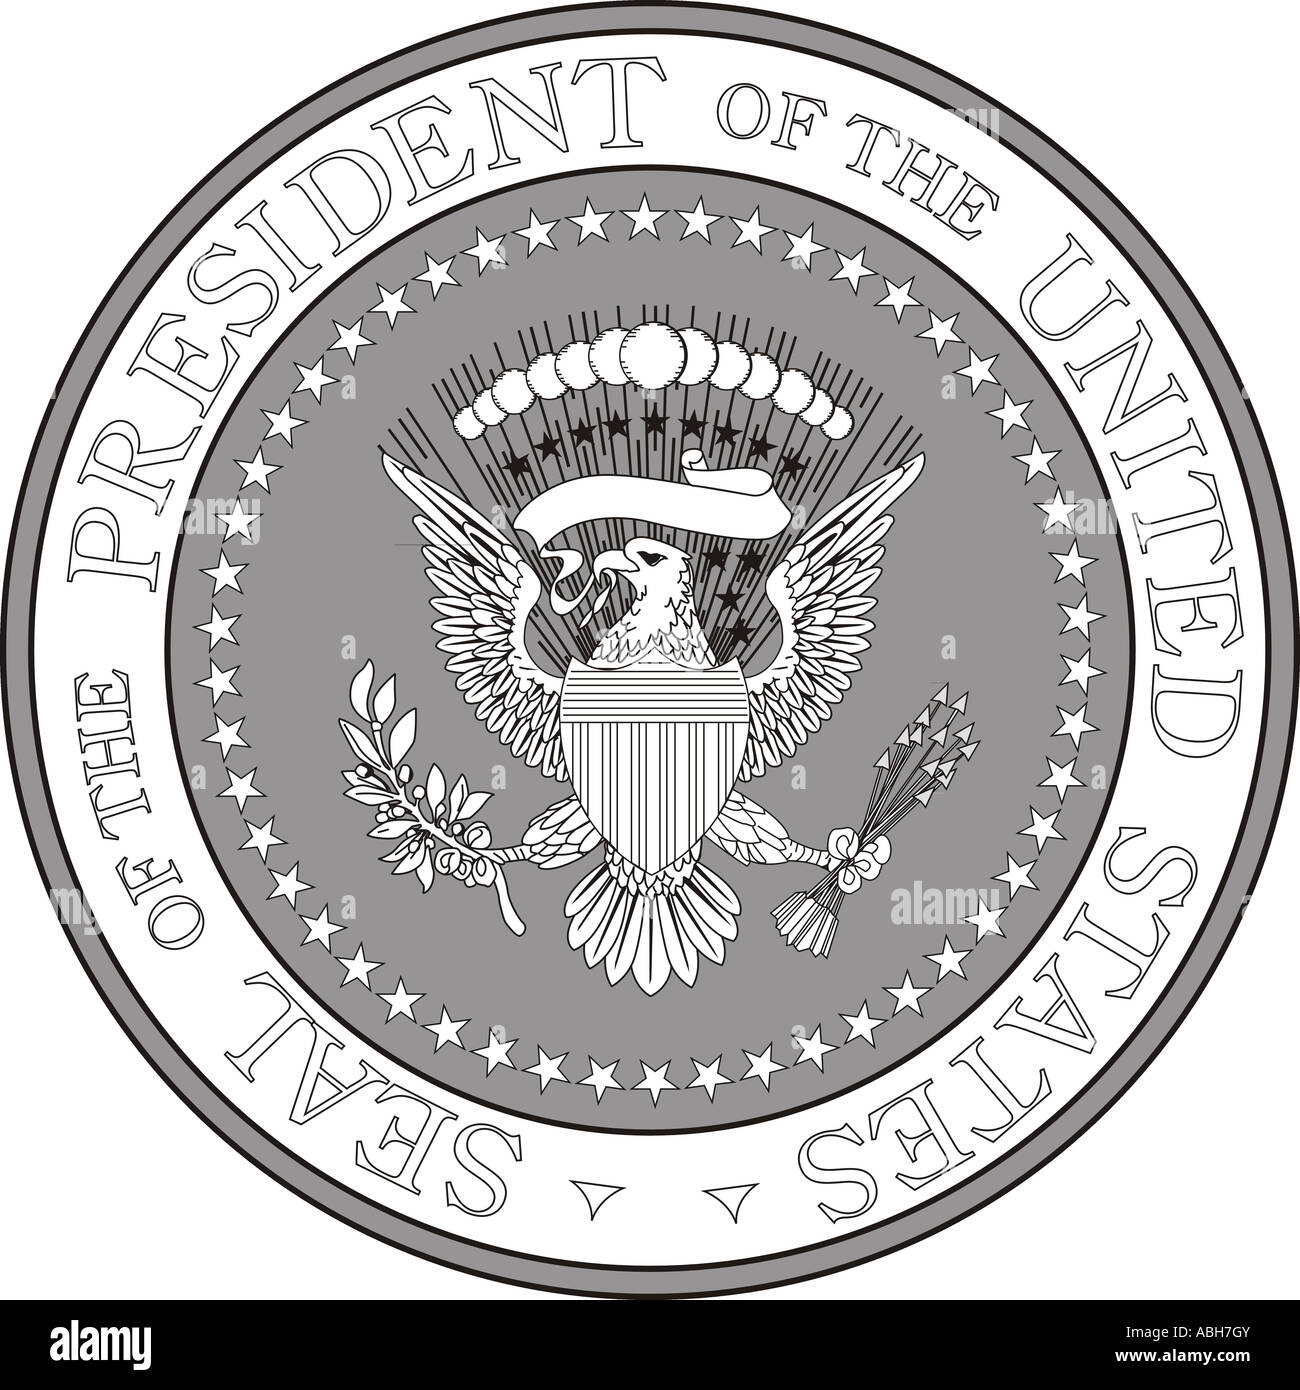 The Presidential Seal Of The United States Of America Stock Photo